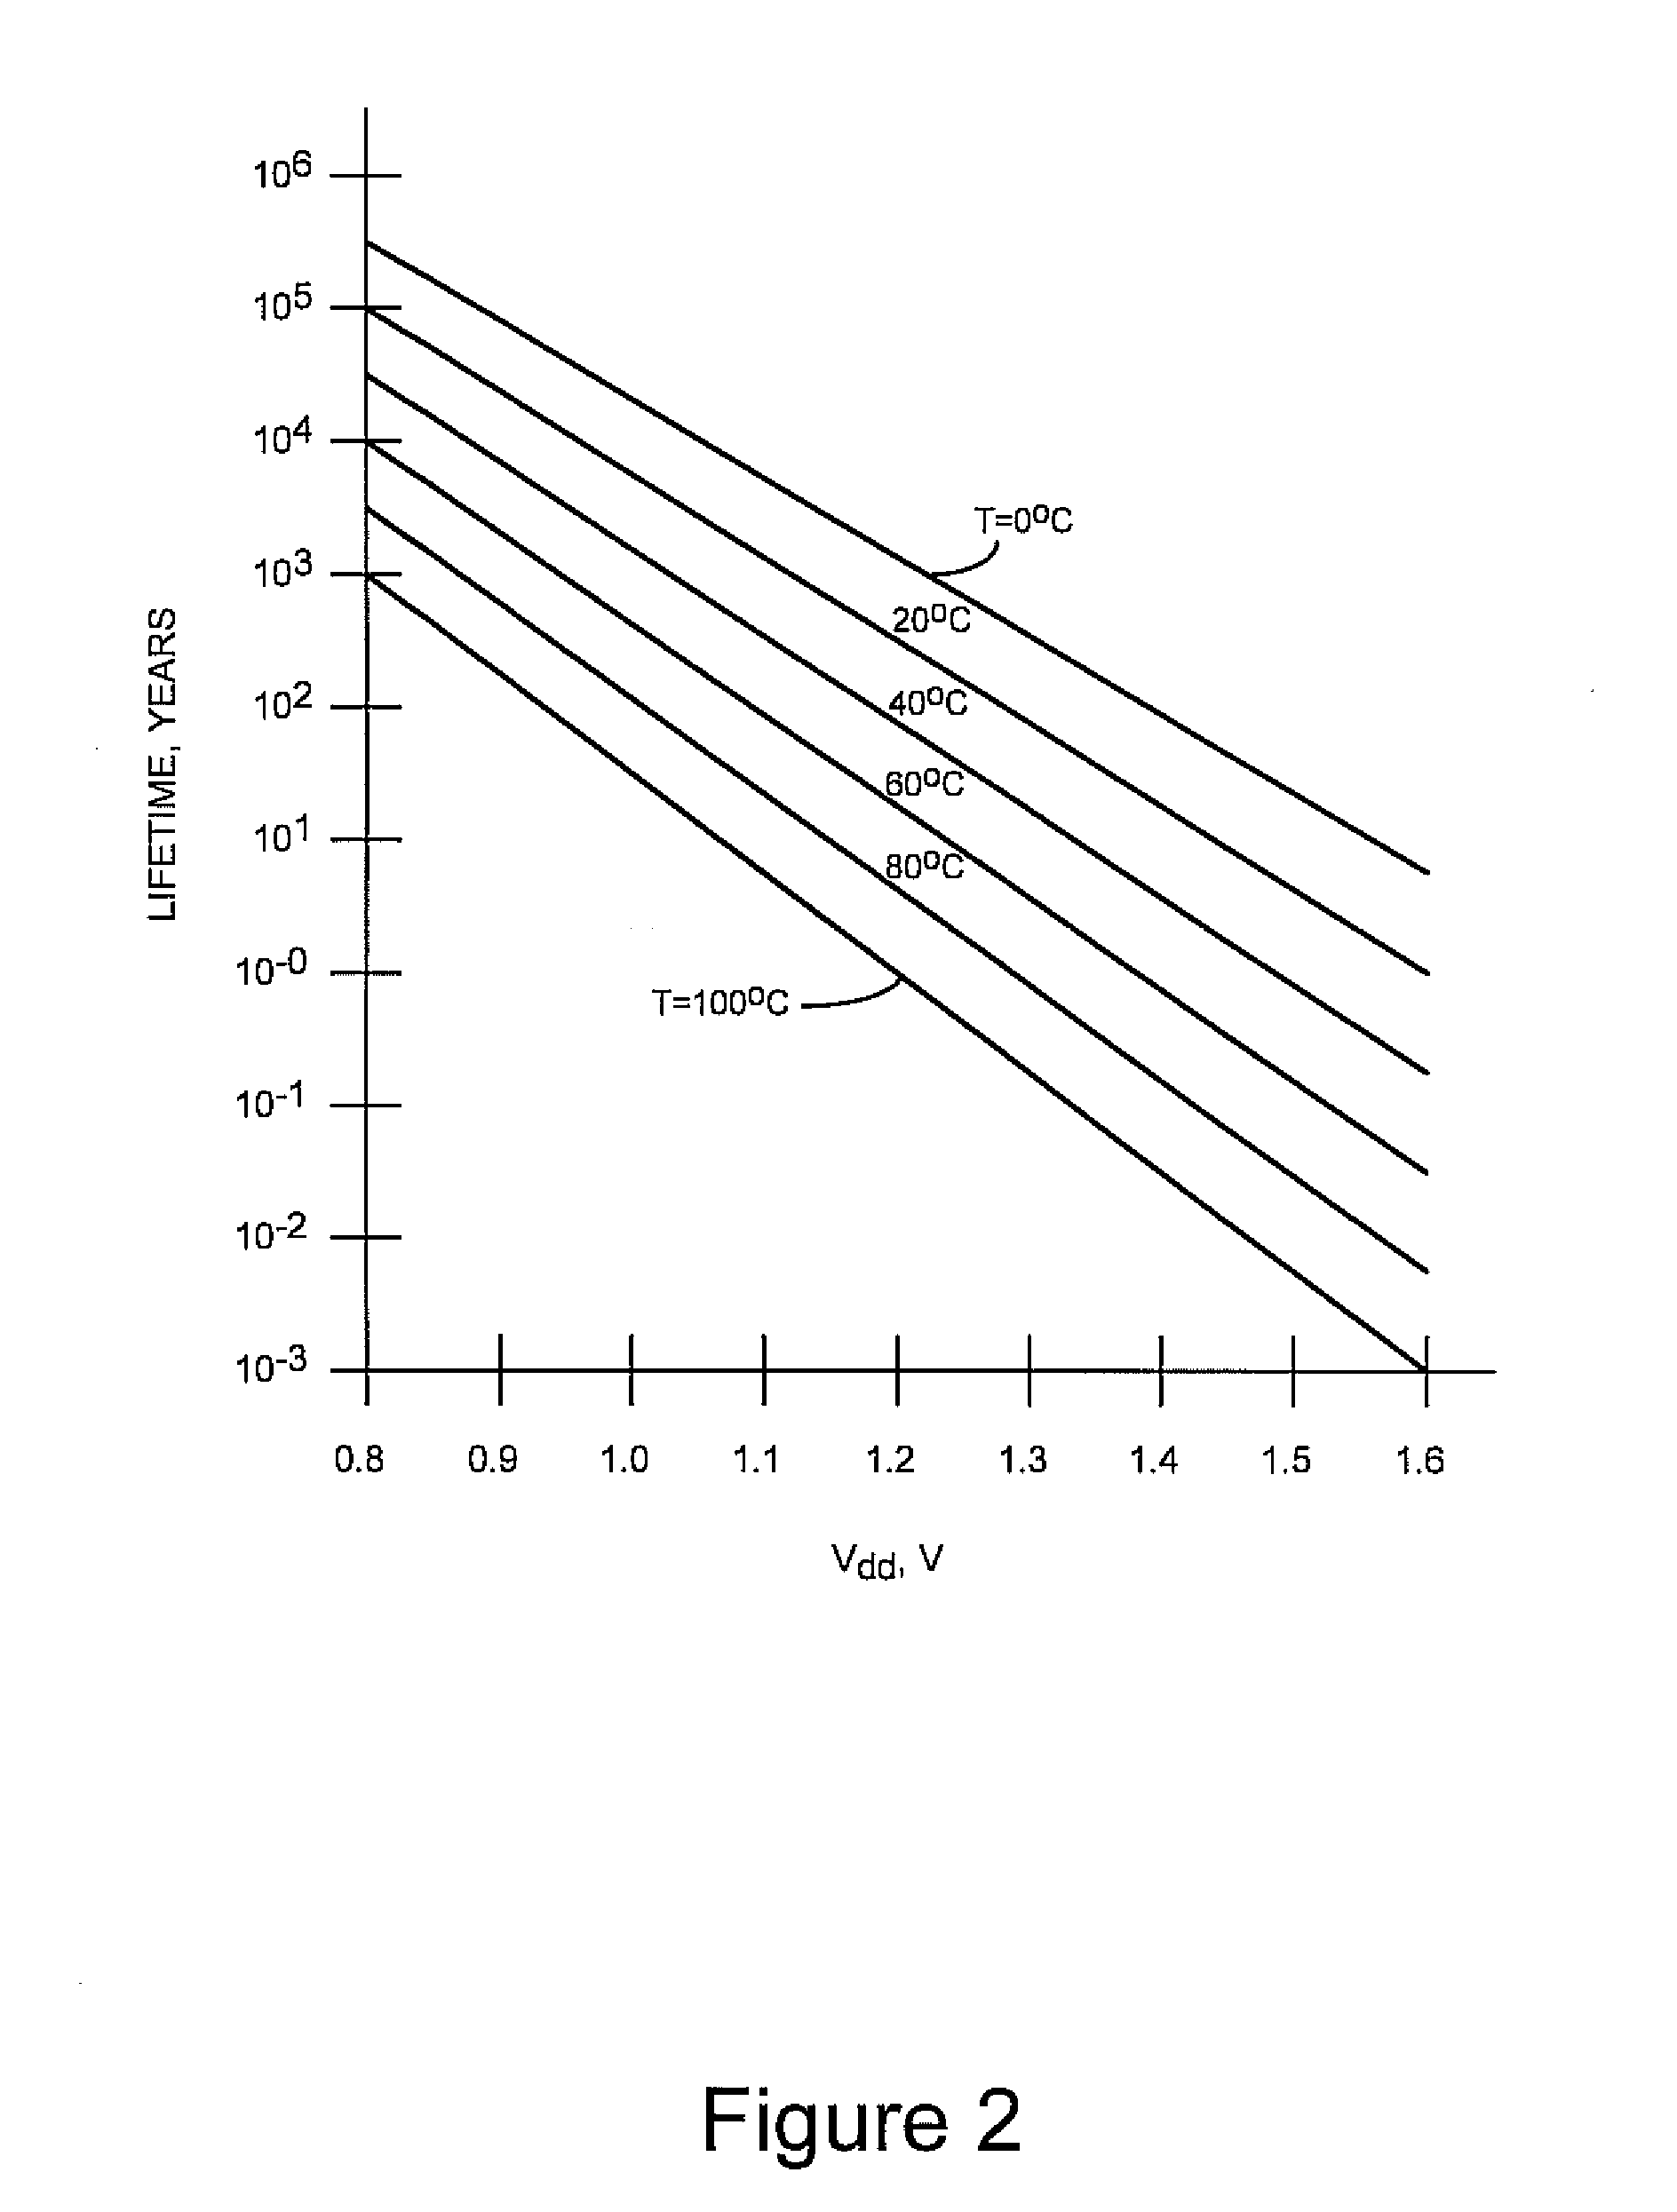 Methods and systems for dynamically changing device operating conditions